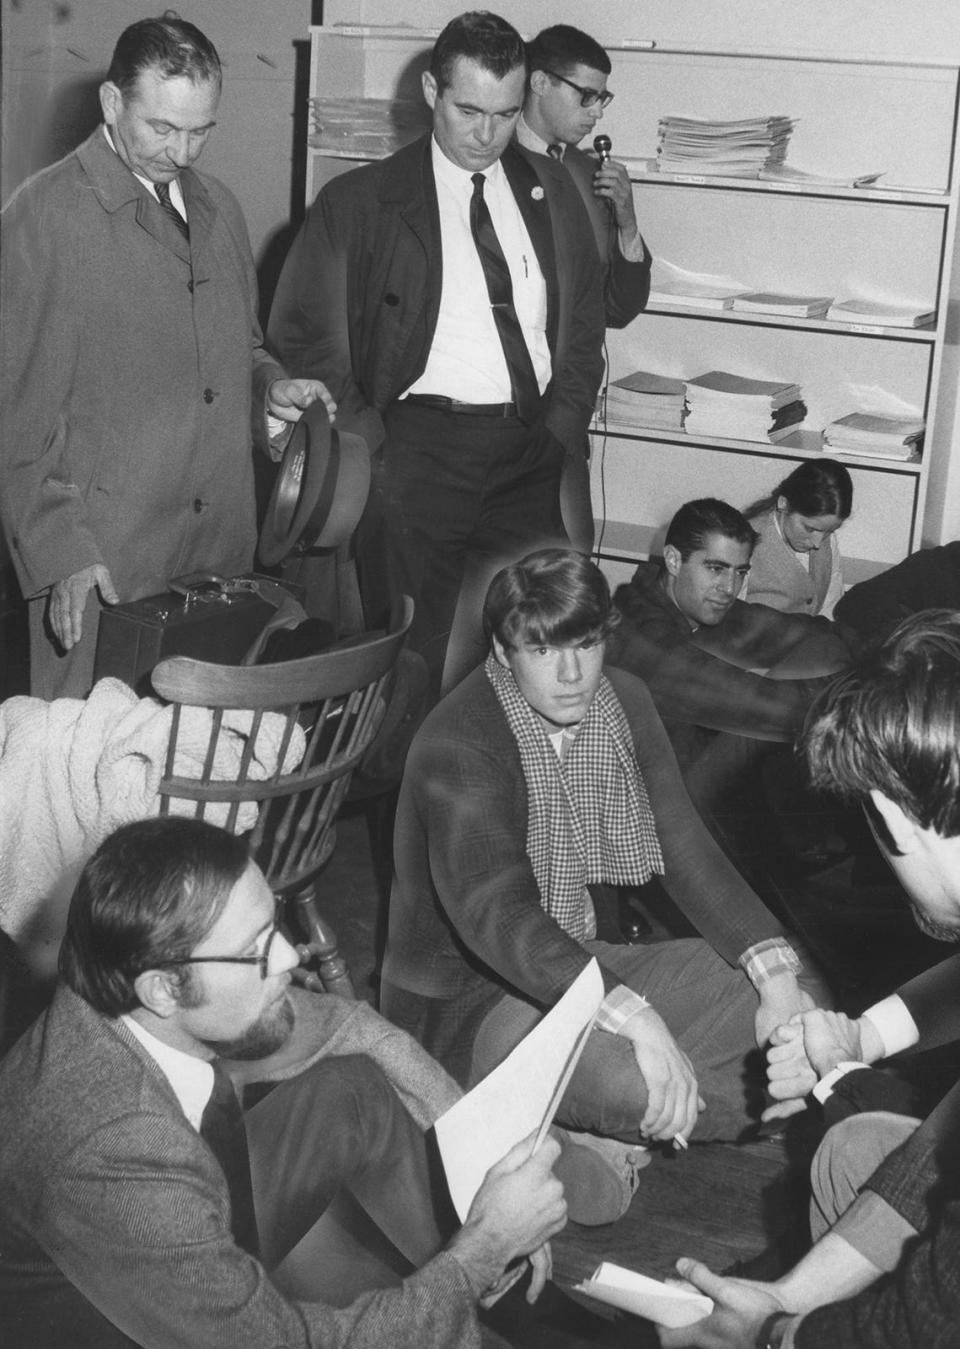 October 31, 1967: Brown graduate student Arnold Strasser reads a statement on behalf of a sit-in. Behind the students are James W. Gurll Jr. of the CIA, left, and Dean Michael J. Brennan, next to him. Dean Brennan later told the students they faced dismissal for refusing to let him pass.